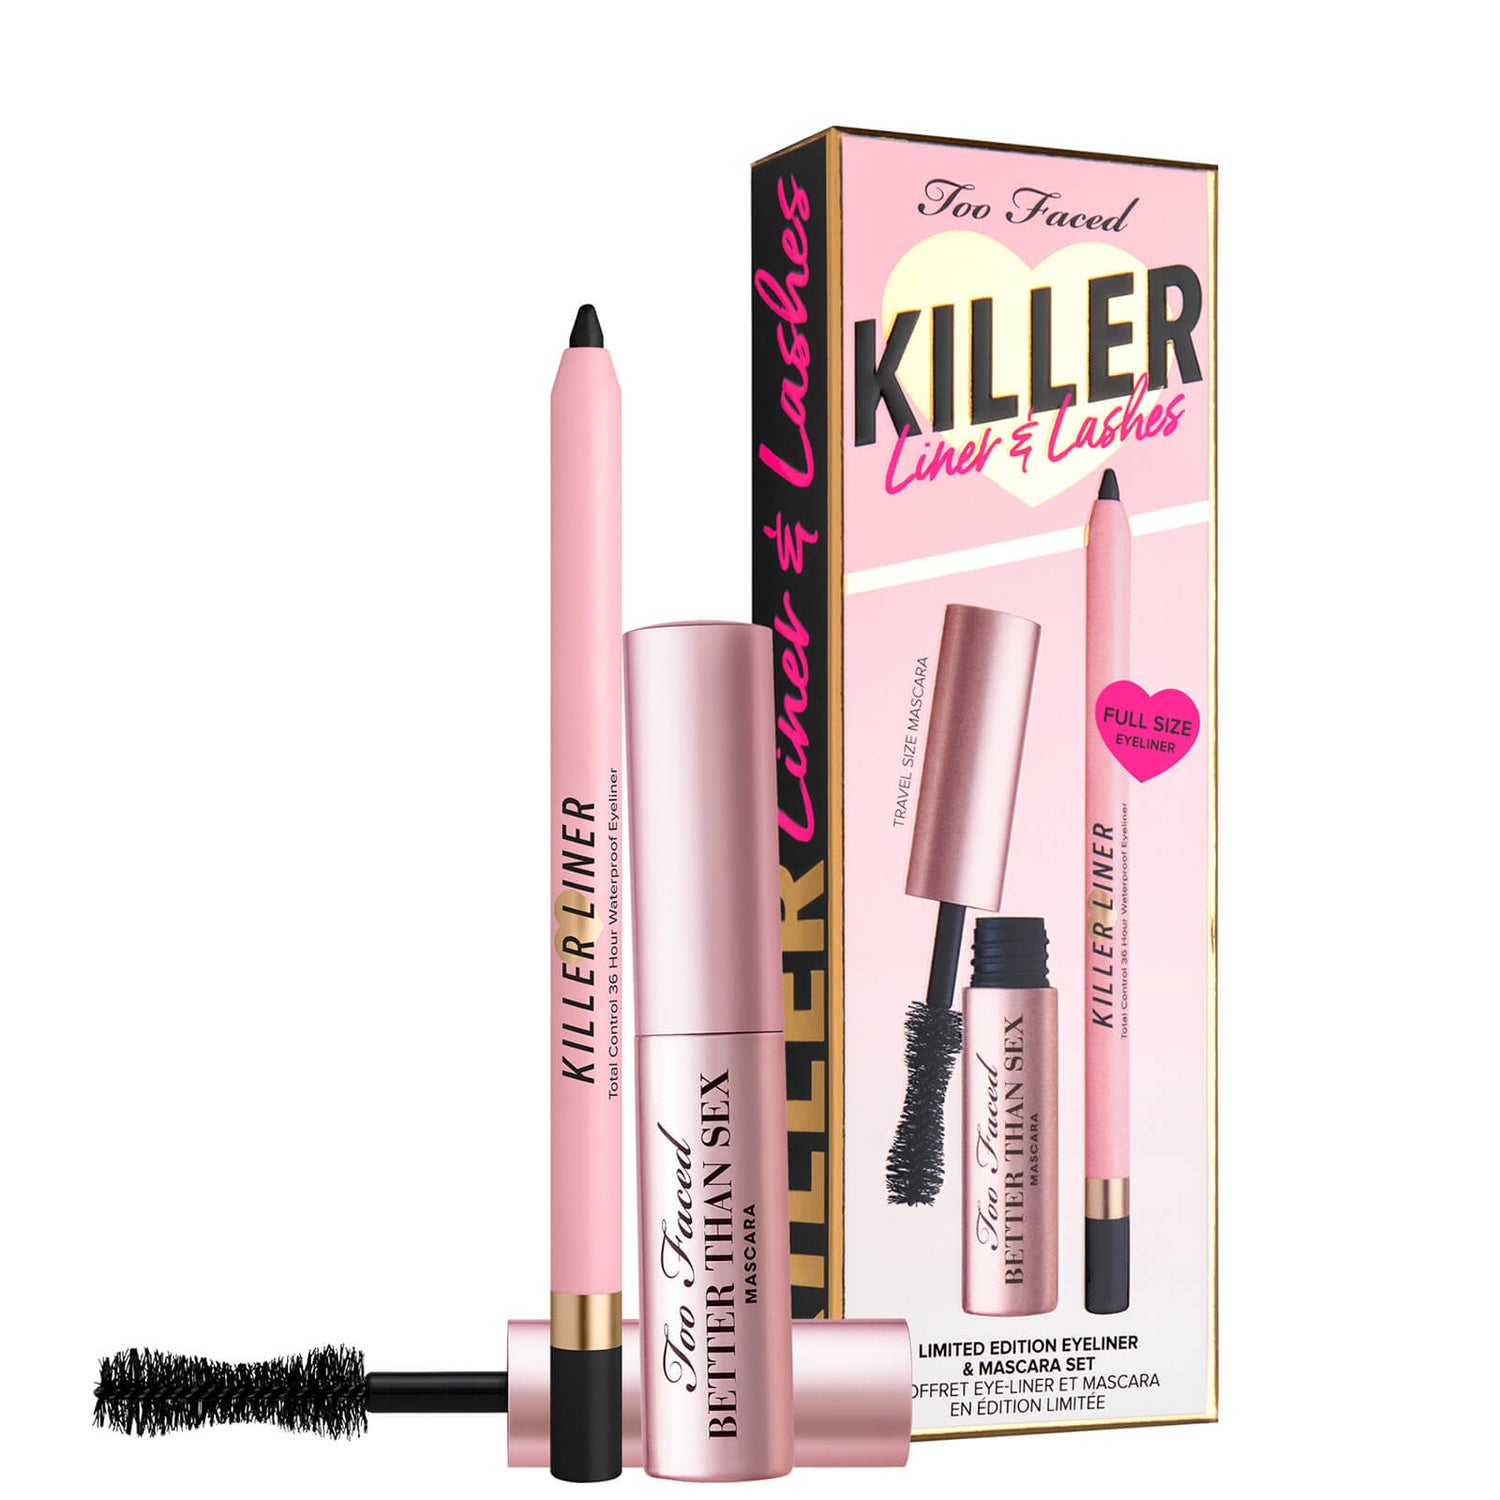 Too Faced Limited Edition Killer Lashes and Liner Mascara and Eyeliner Duo Set (Vale 33€)